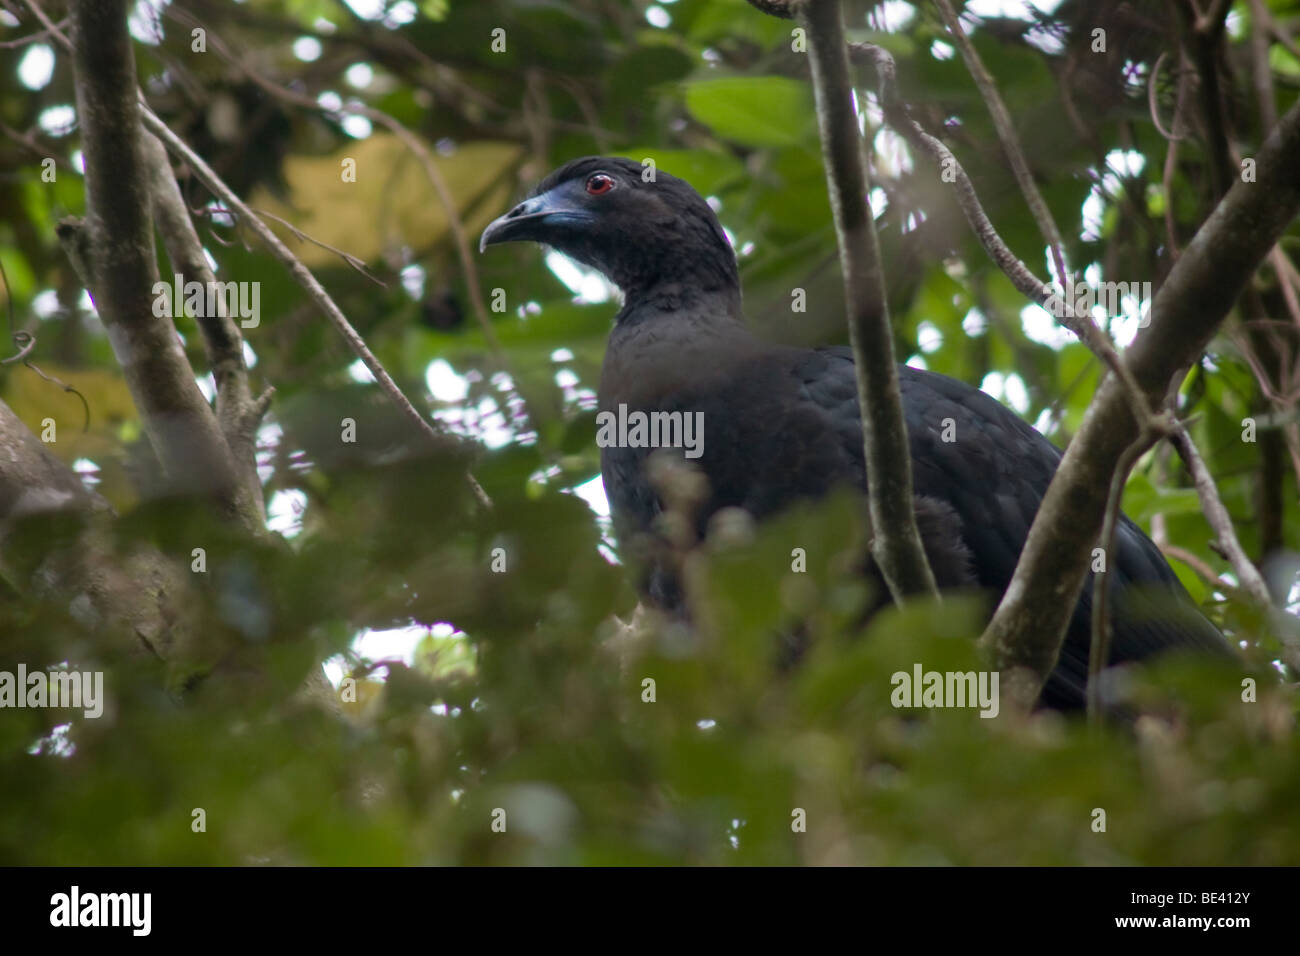 Black guan, Chamaepetes unicolor, in a tree. Photographed in Costa Rica. Stock Photo